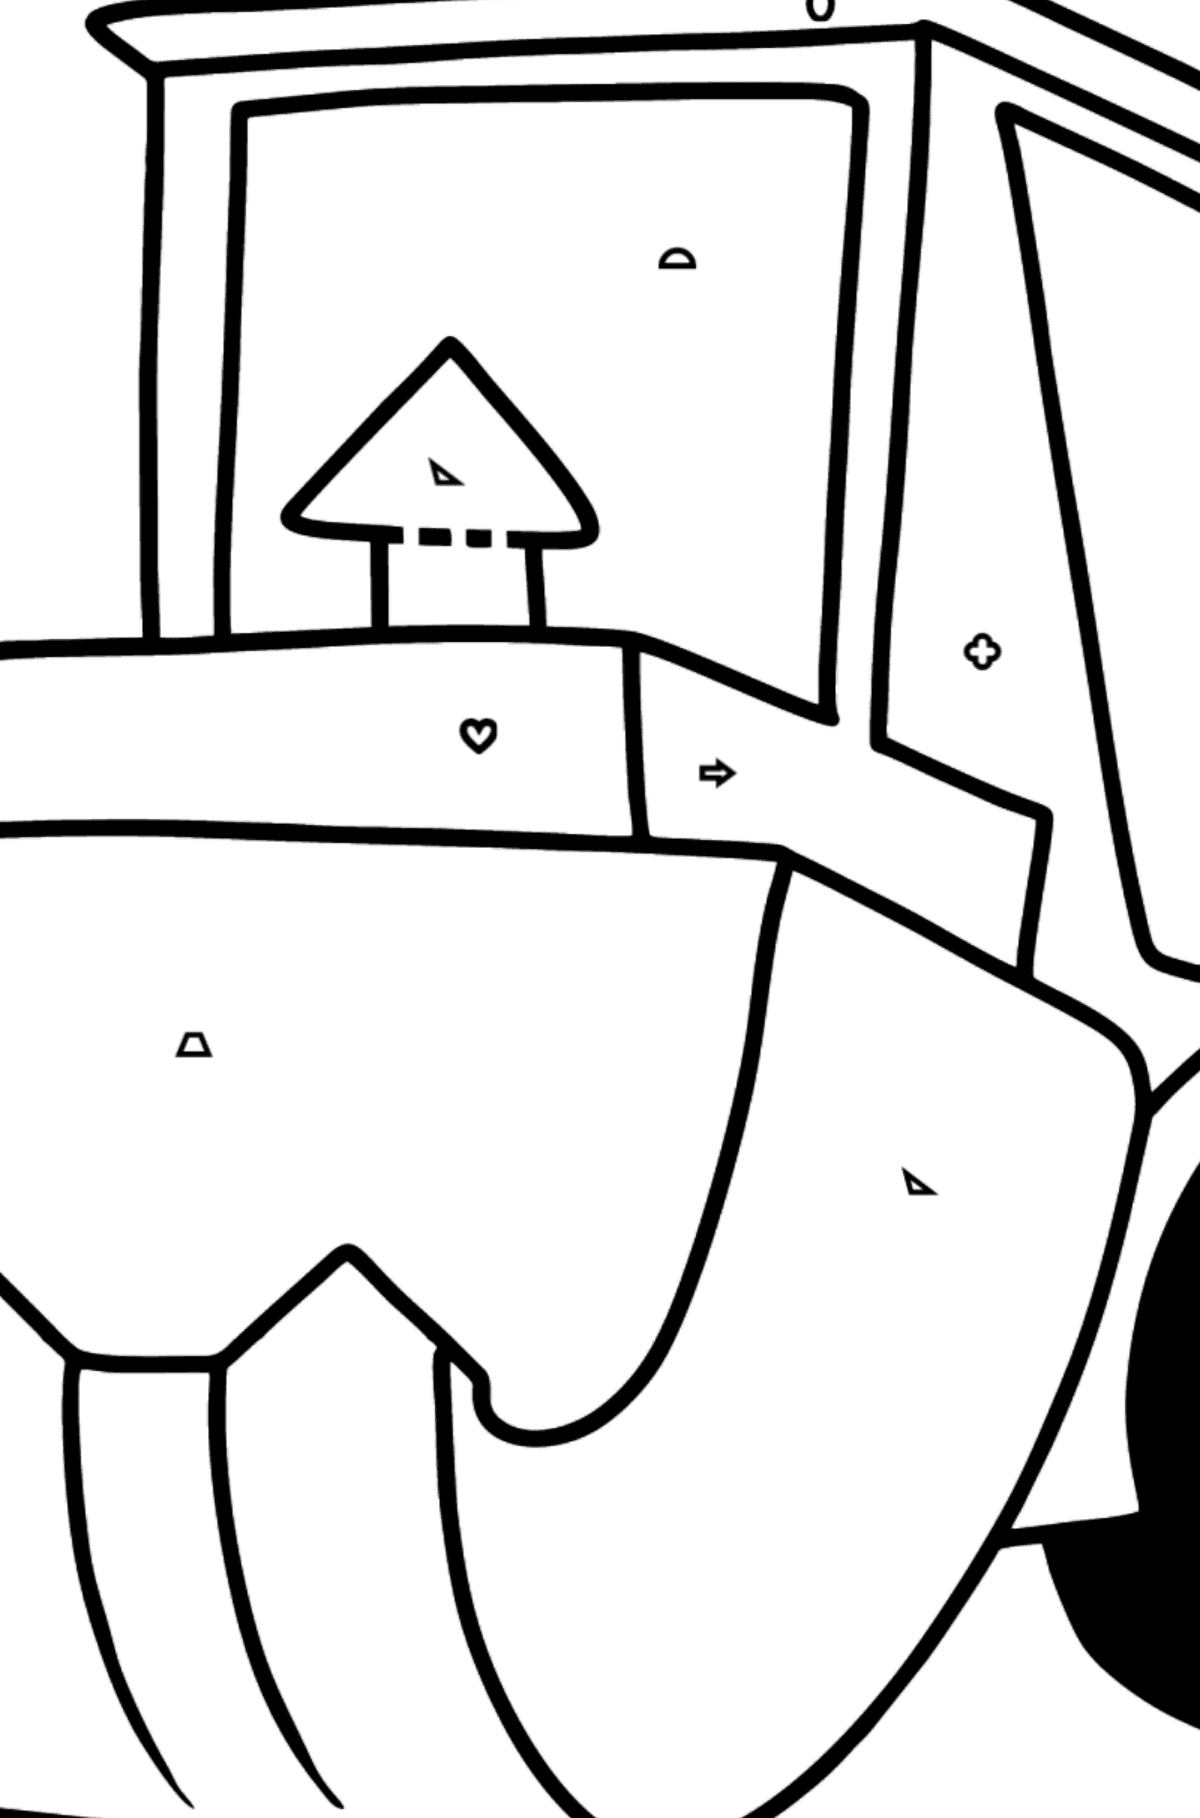 Tractor with Bag coloring page - Coloring by Geometric Shapes for Kids